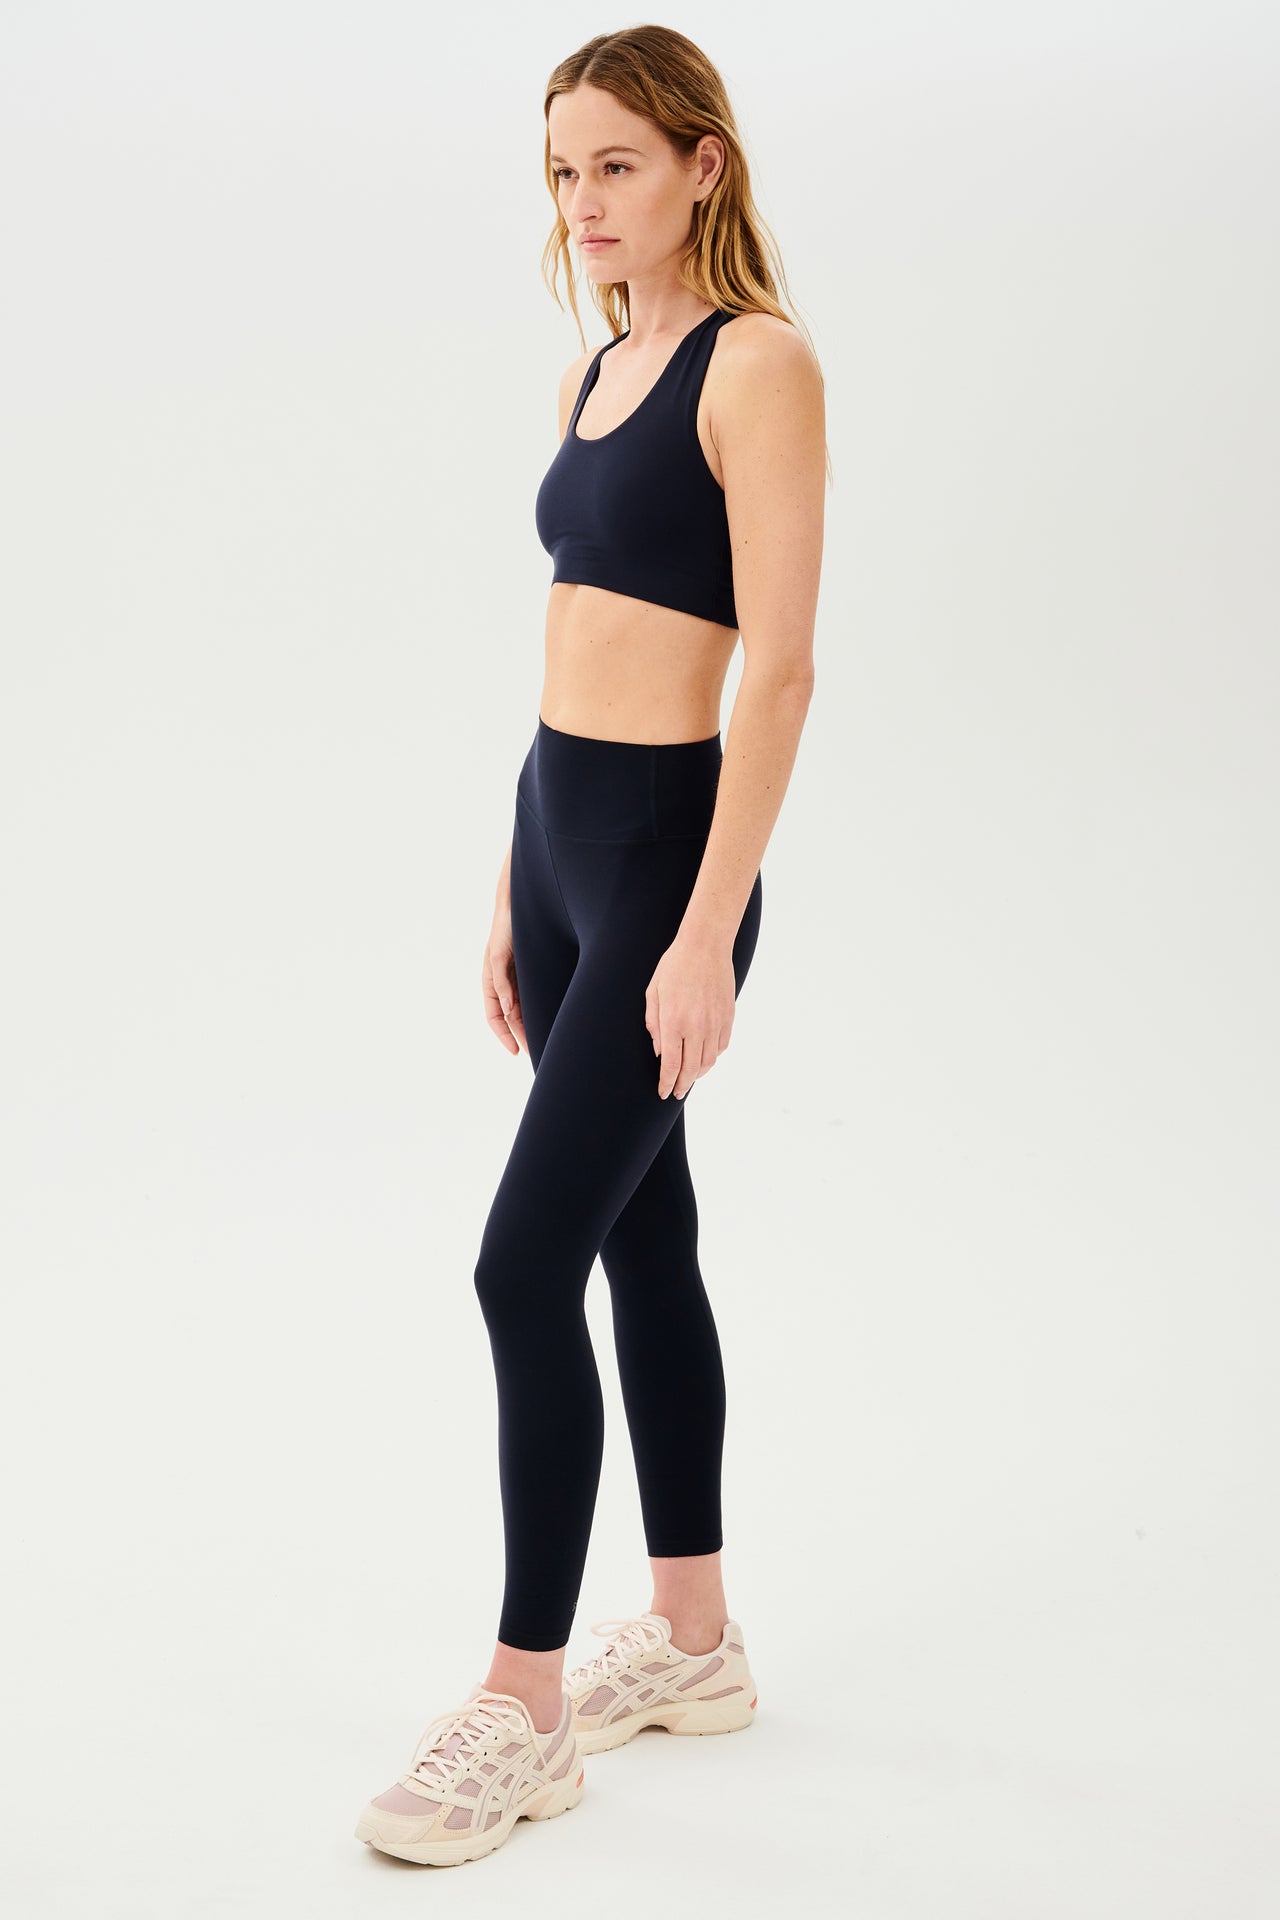 Full side view of girl wearing highwasited dark blue leggings with dark blue sports bra and pink and cream shoes